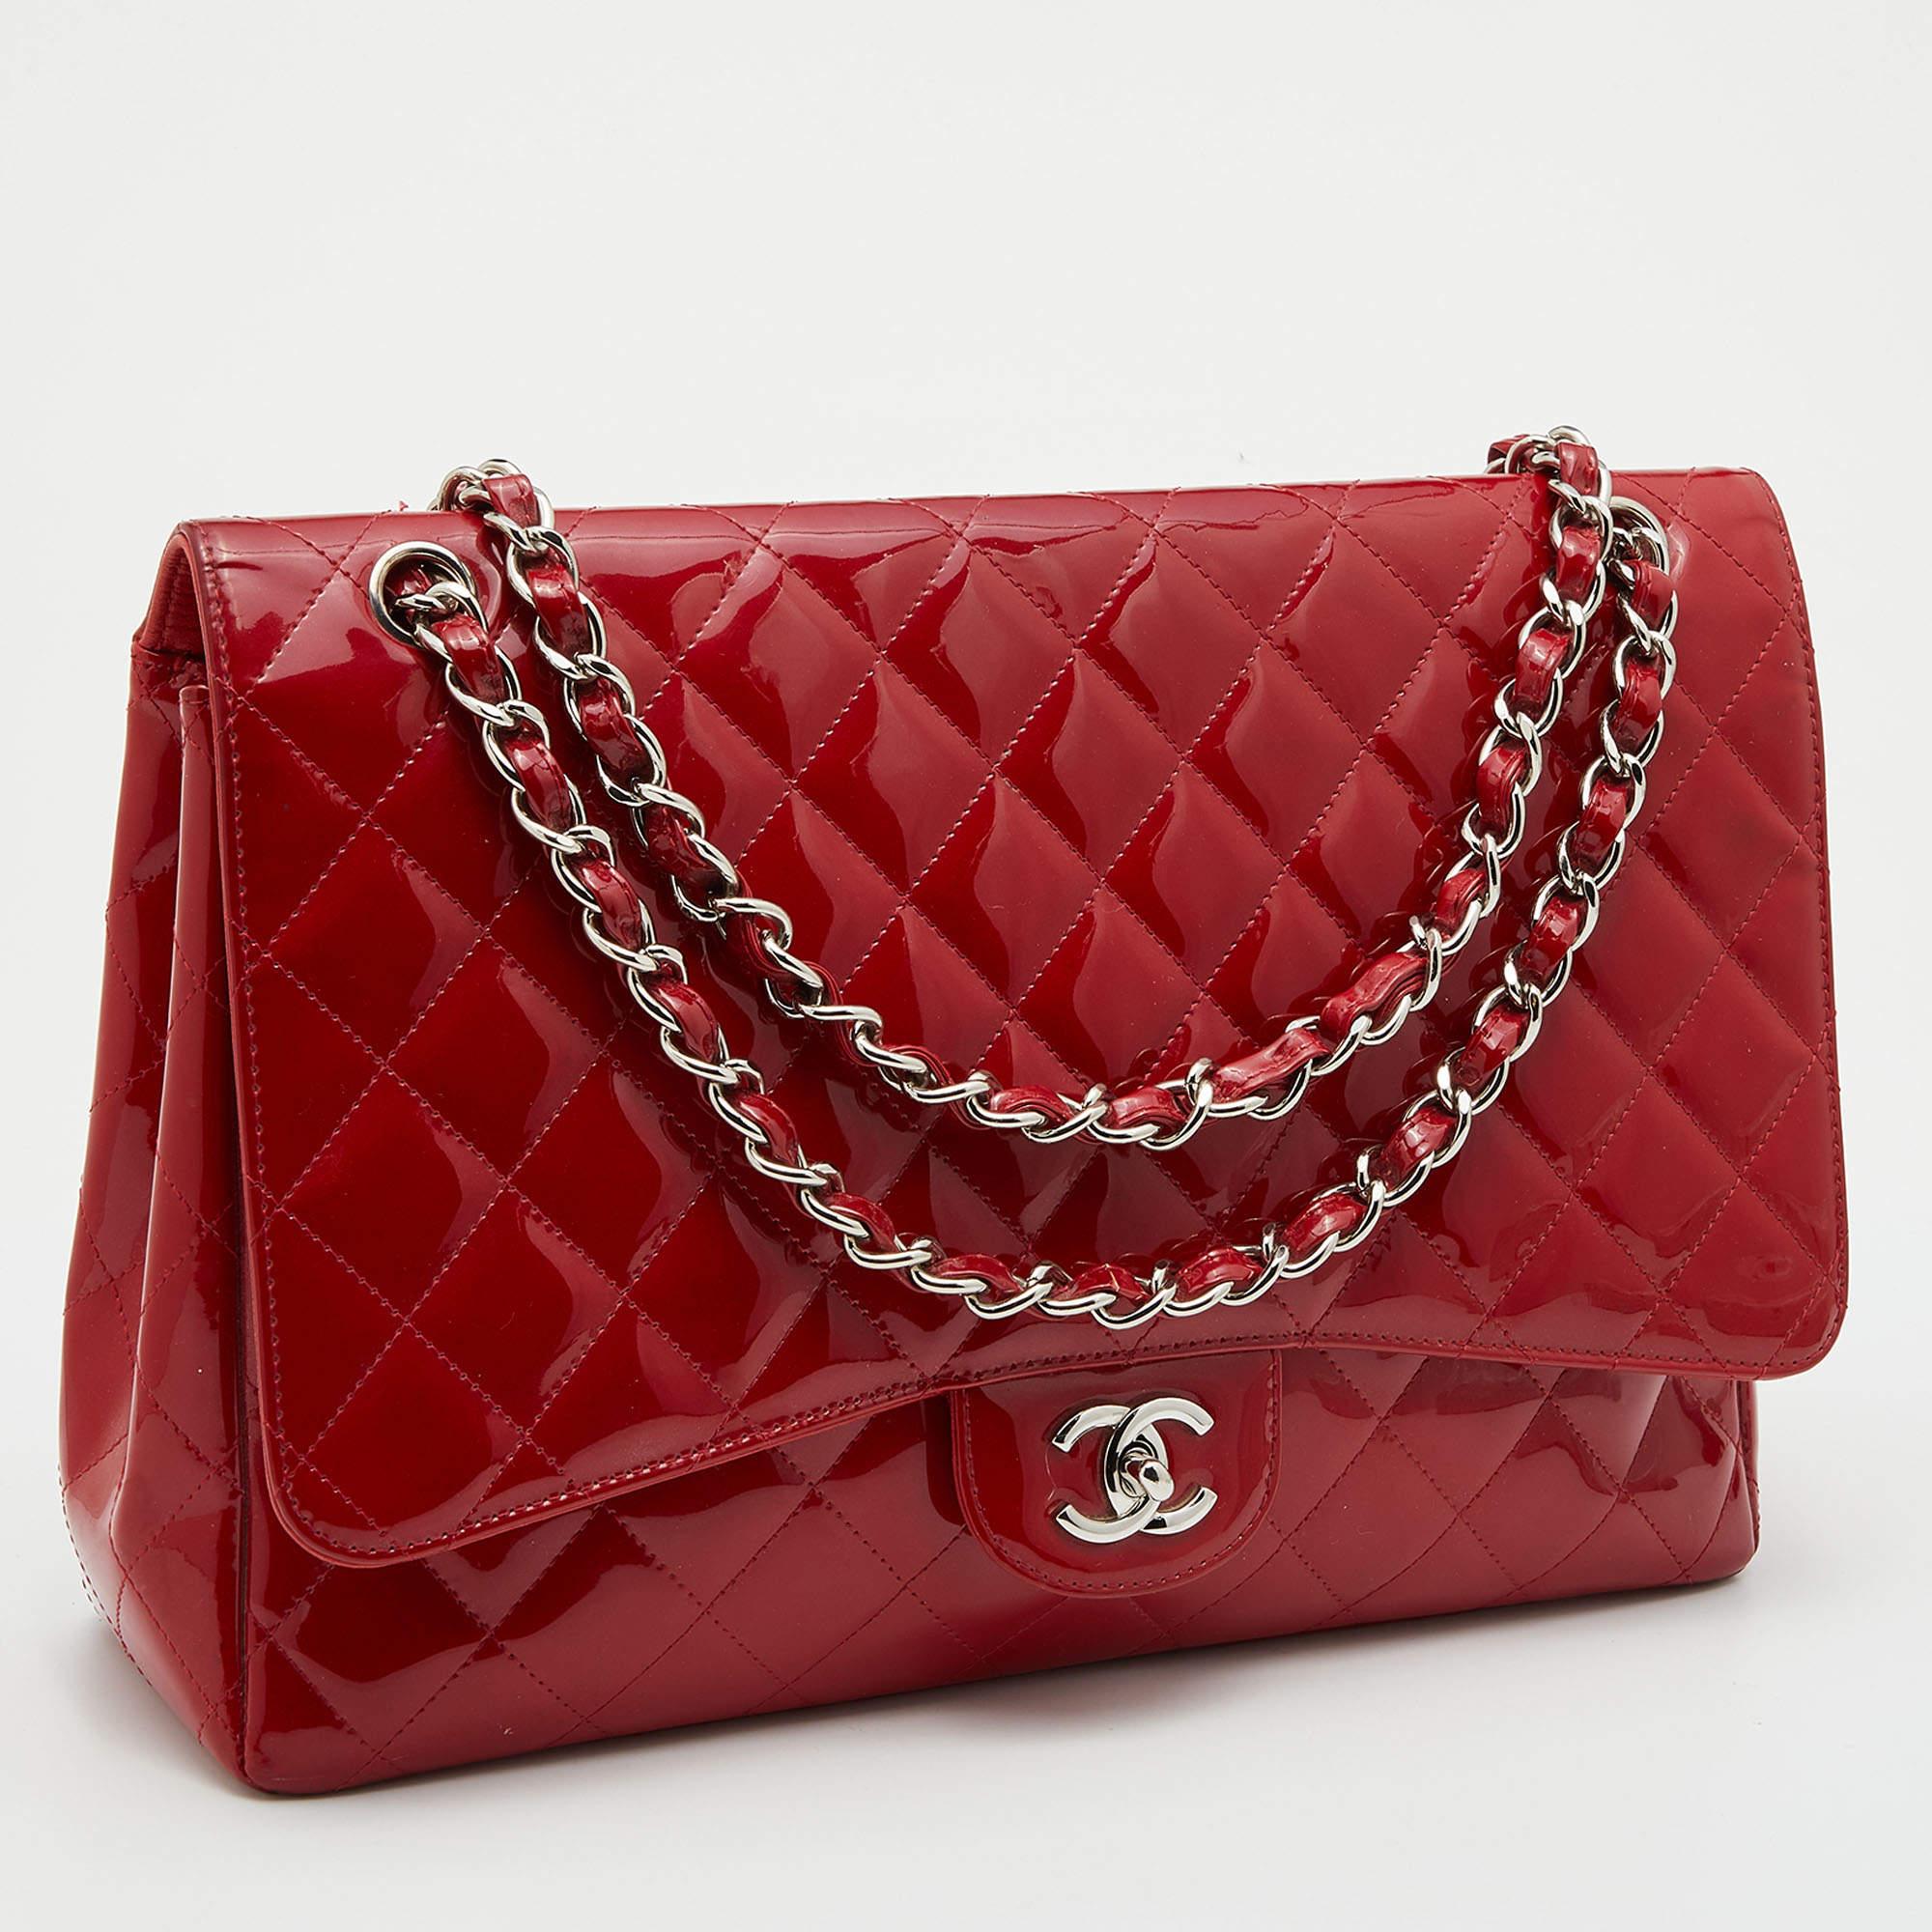 Women's Chanel Red Quilted Patent Leather Maxi Classic Single Flap Bag